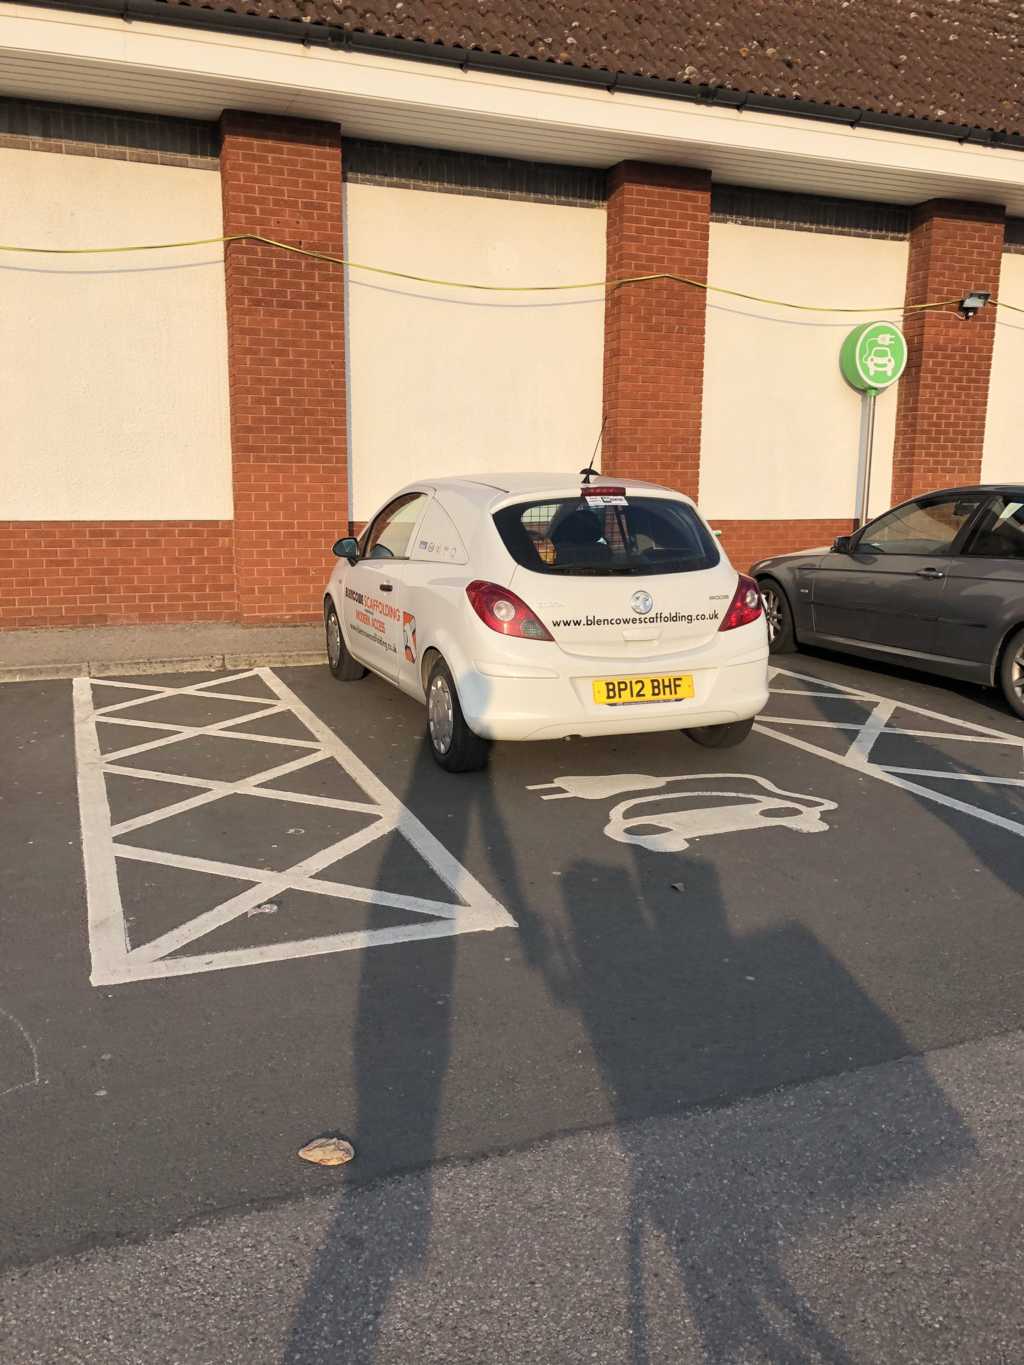 BP12 BHF is a Selfish Parker